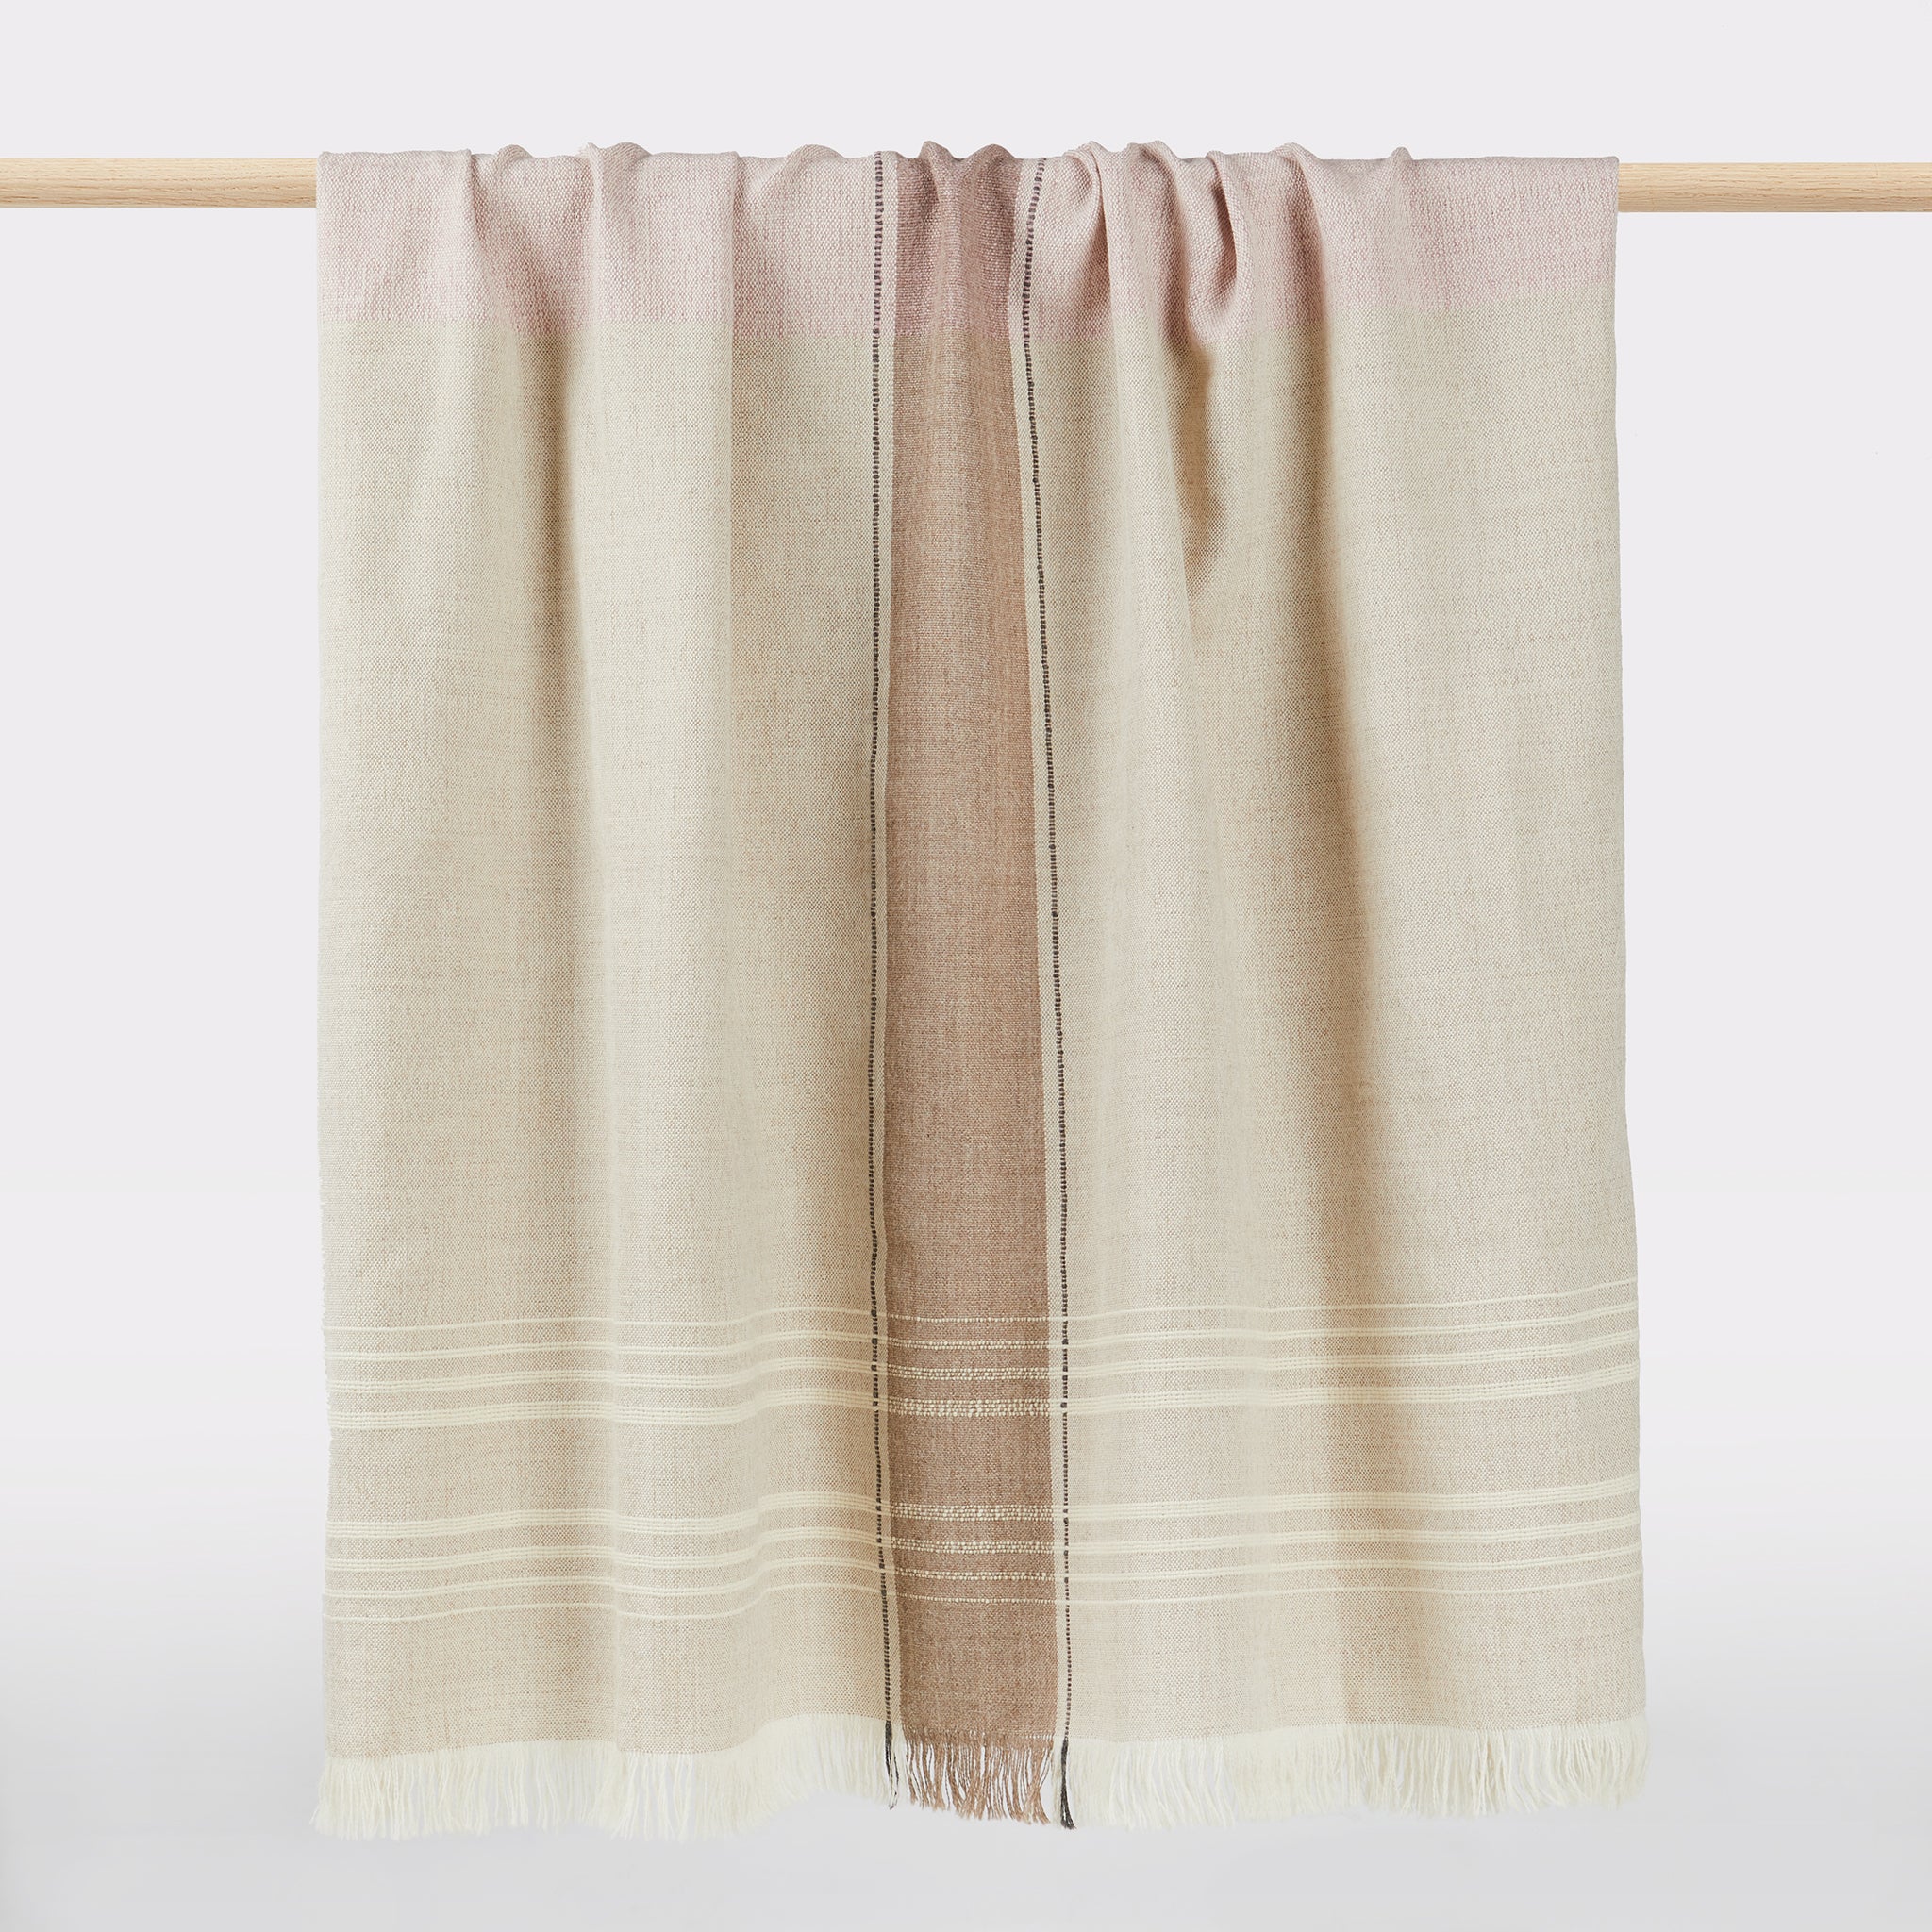 Handwoven for By Native in Peru: Beautiful baby alpaca blanket in the colour combination grey, beige, natural and antique pink with eyelash fringes and high relief stripes. Size: 178 x 128 cm Colours: Grey / Beige / Nature / Old Pink